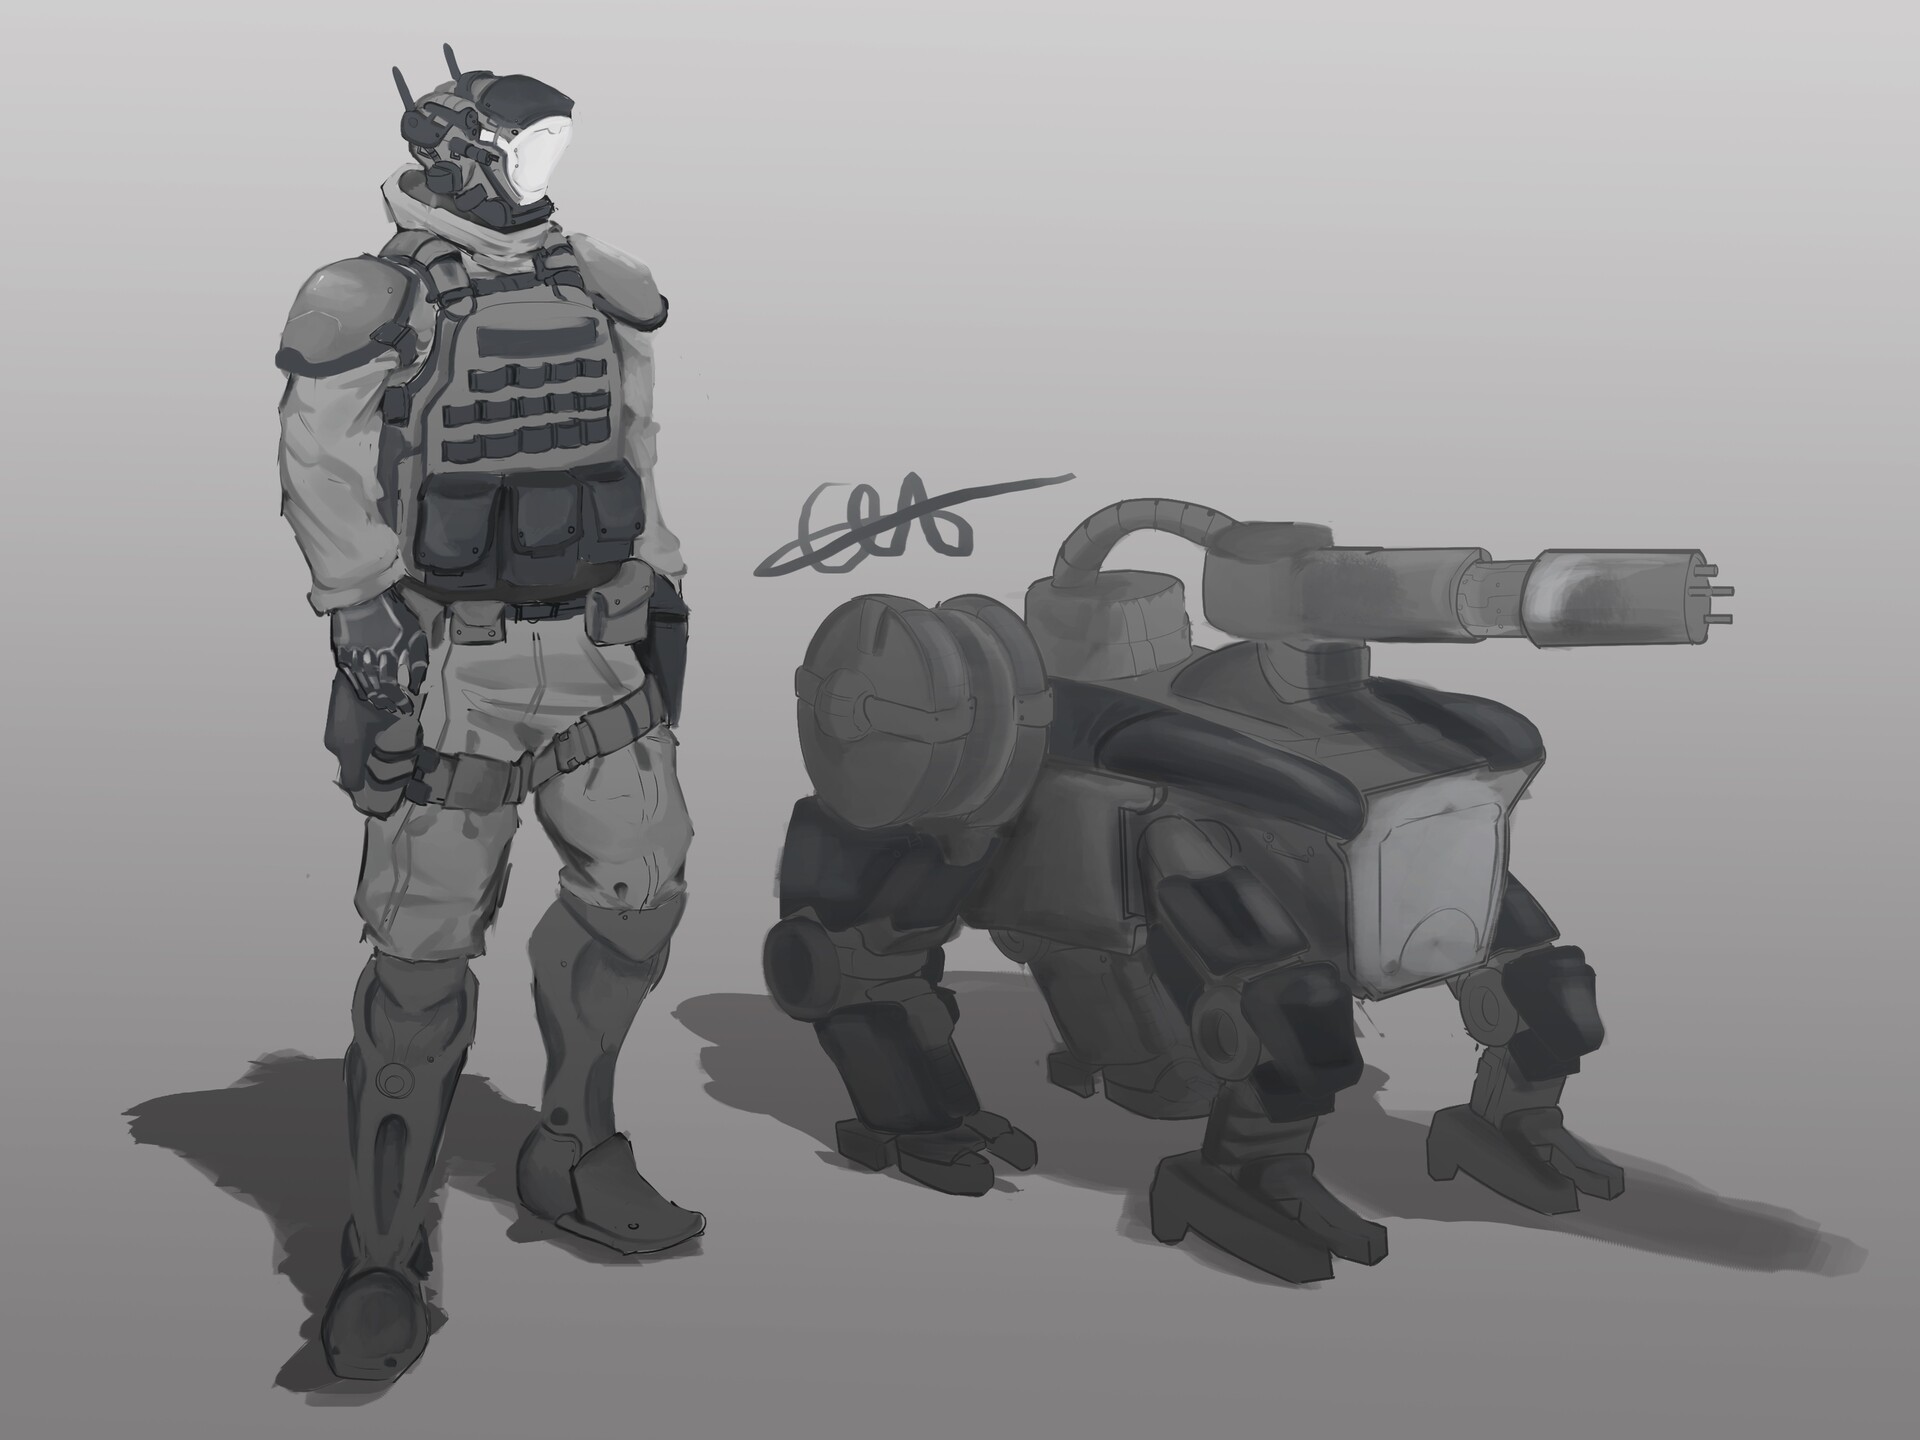 ArtStation - Soldier and mech dog